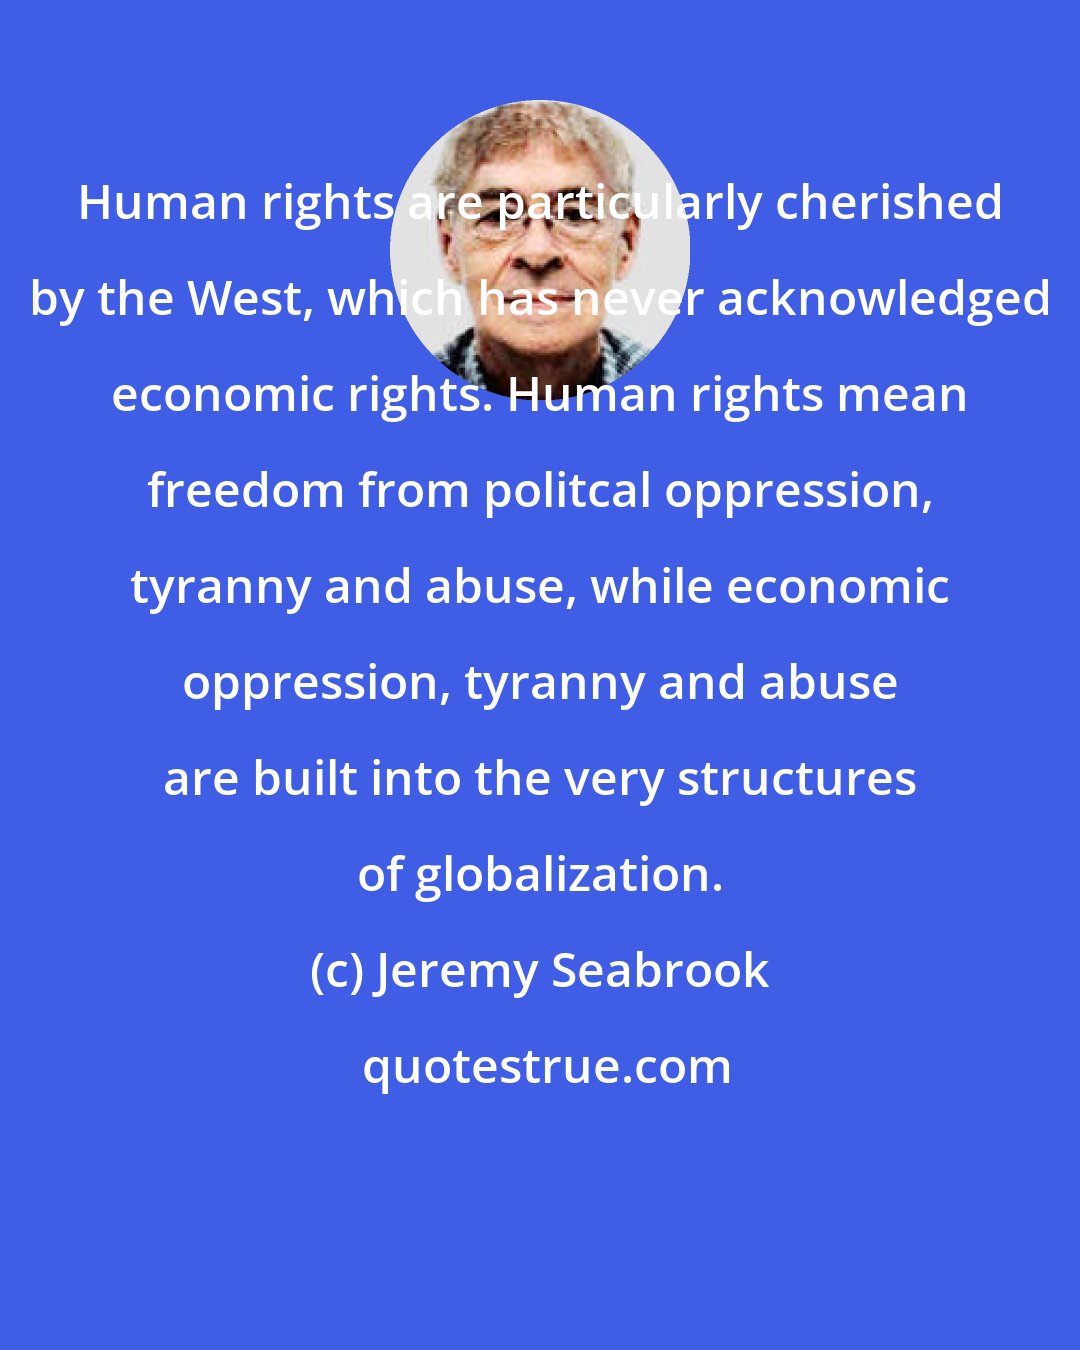 Jeremy Seabrook: Human rights are particularly cherished by the West, which has never acknowledged economic rights. Human rights mean freedom from politcal oppression, tyranny and abuse, while economic oppression, tyranny and abuse are built into the very structures of globalization.